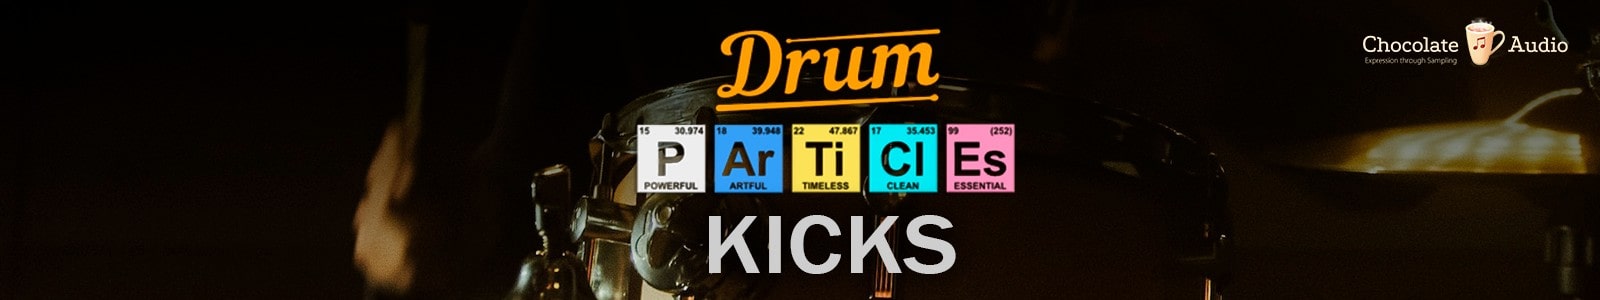 Drum Particles Collection by Chocolate Audio